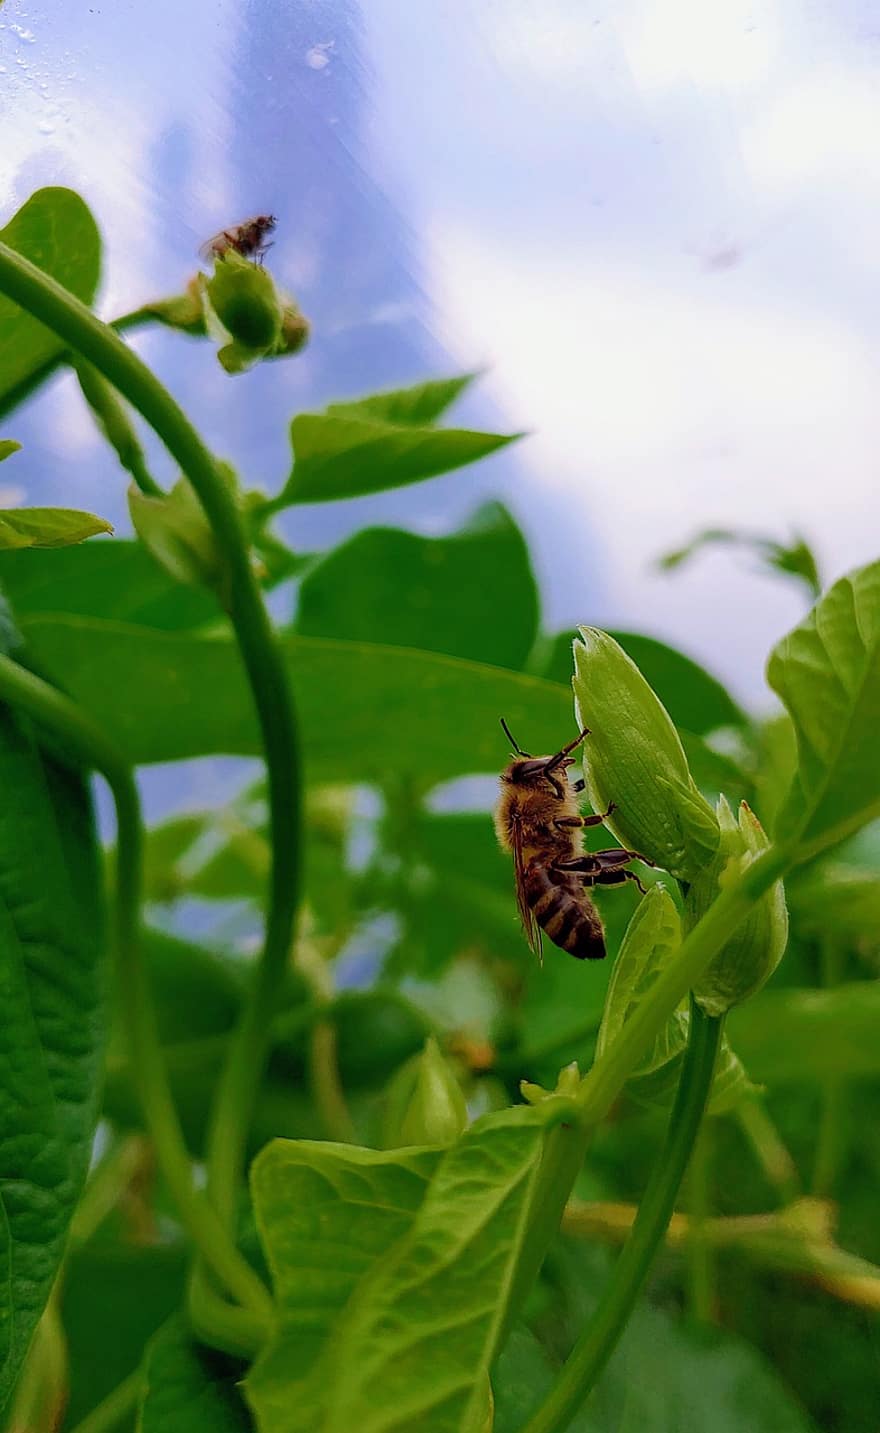 Bee, Insect, Garden, Greenhouse, Beans, Leaves, Nature, Green, Break, Entwine, Tomato House